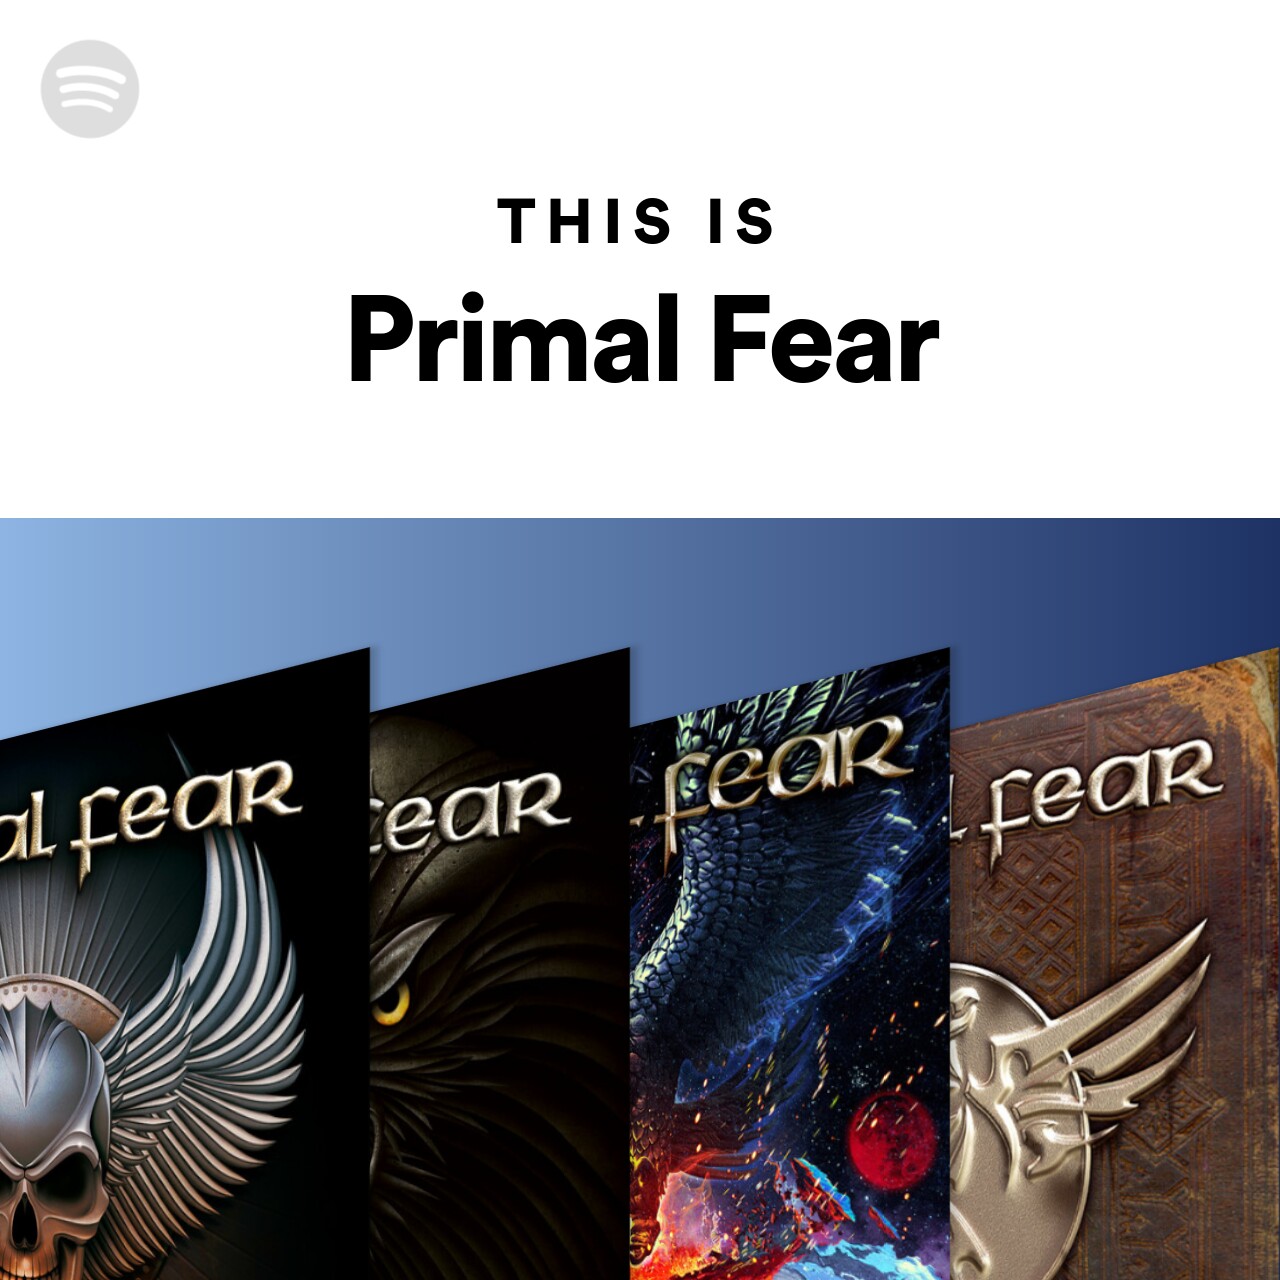 This Is Primal Fear